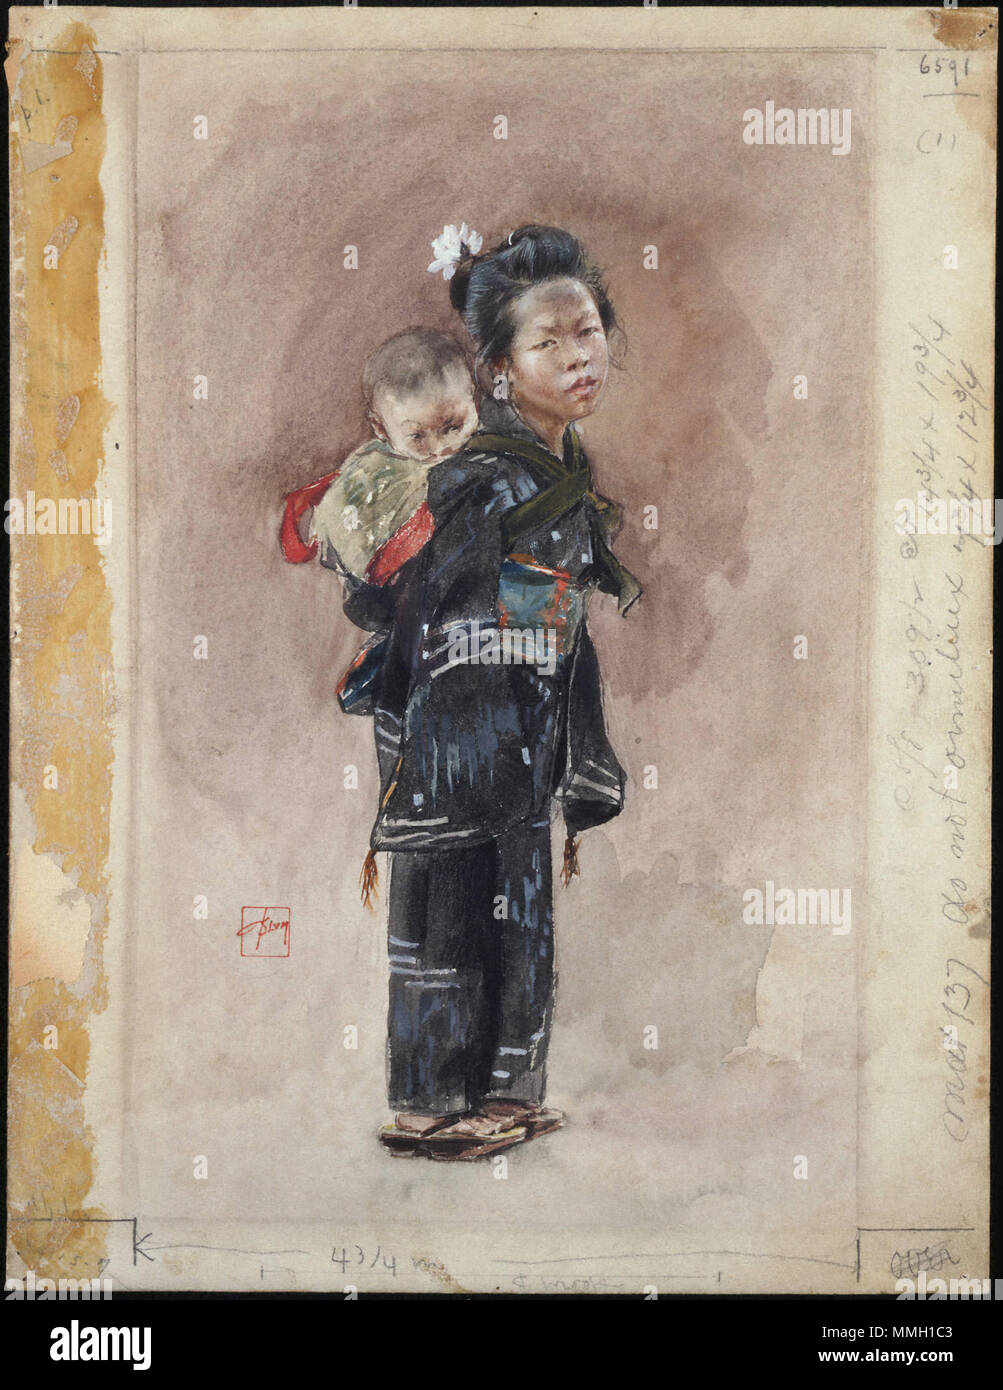 .  English: Robert Frederick Blum, American, 1857–1903 That is Where All Babies Live in Japan, 1890–92 Watercolor on board 35.7 x 27.4 cm. (14 1/16 x 10 13/16 in.) Gift of Charles Scribner III, Class of 1973 and Graduate School Class of 1977 x1993-163 In an 1893 account of his journey to Japan published in Scribner’s Magazine, Blum writes about his 'wild desire' to visit that country, which he traces back to his purchase of a Japanese fan at a music festival in Cincinnati when he was just fifteen years old. After studying at the Pennsylvania Academy of Fine Arts, Blum had his dream realized wh Stock Photo